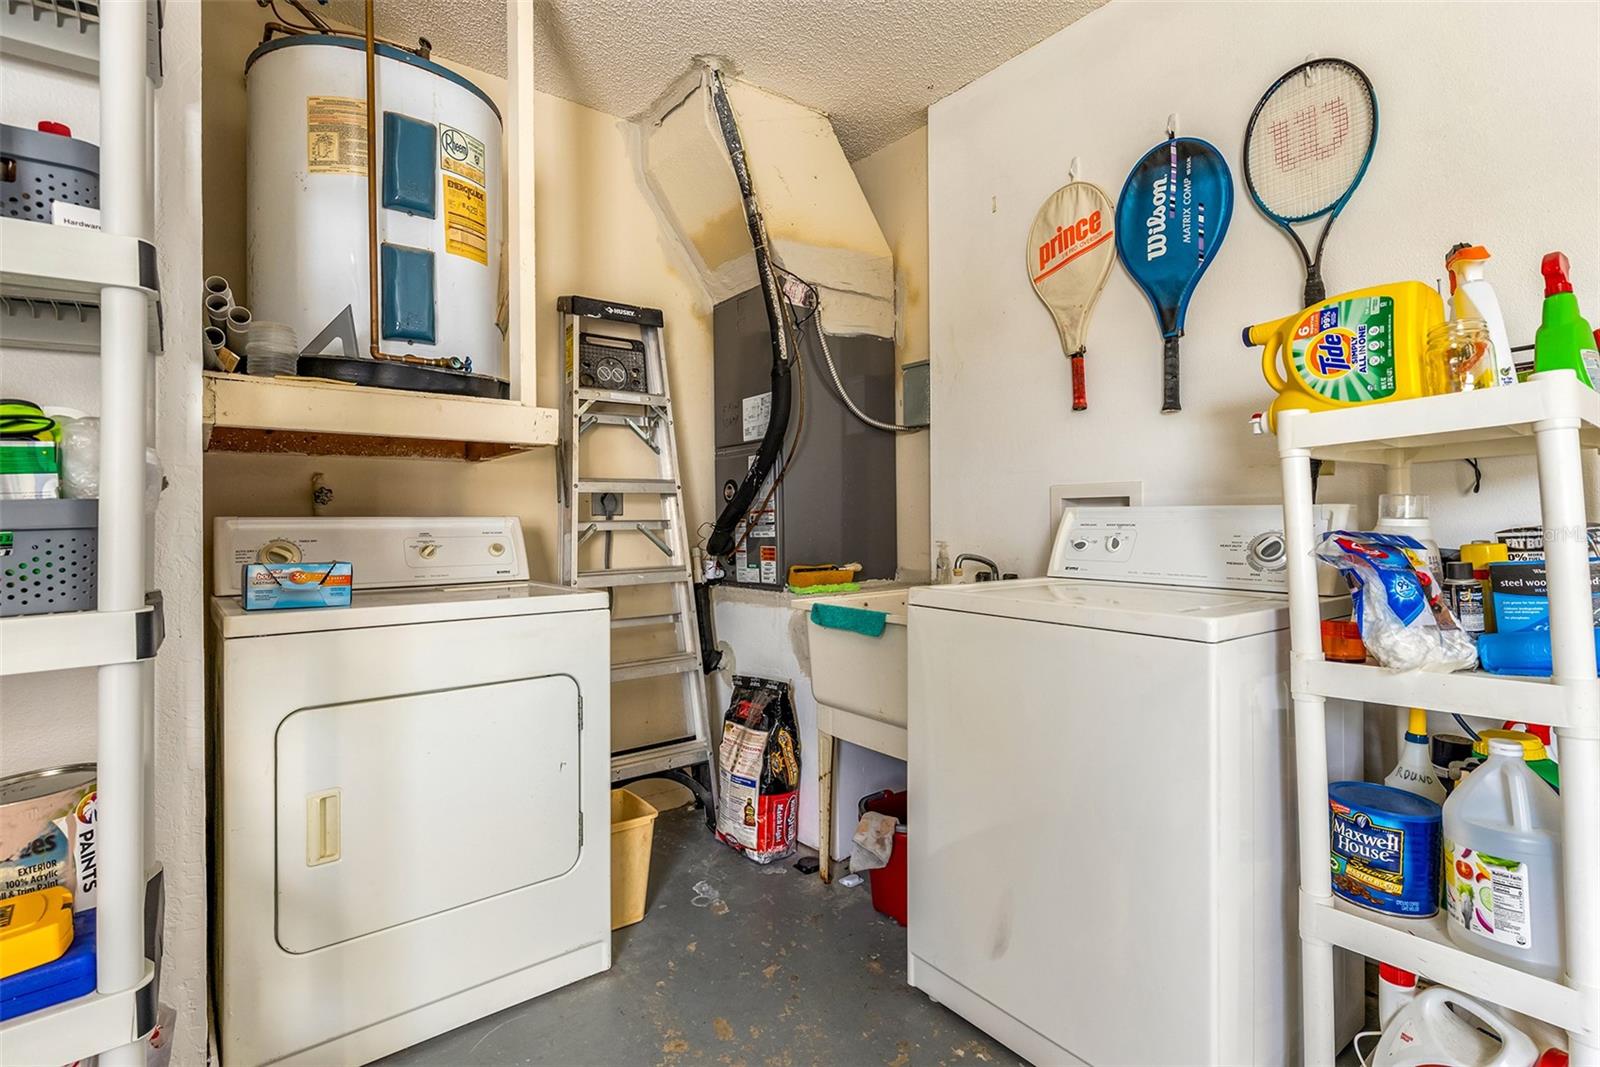 Laundry is located in the garage